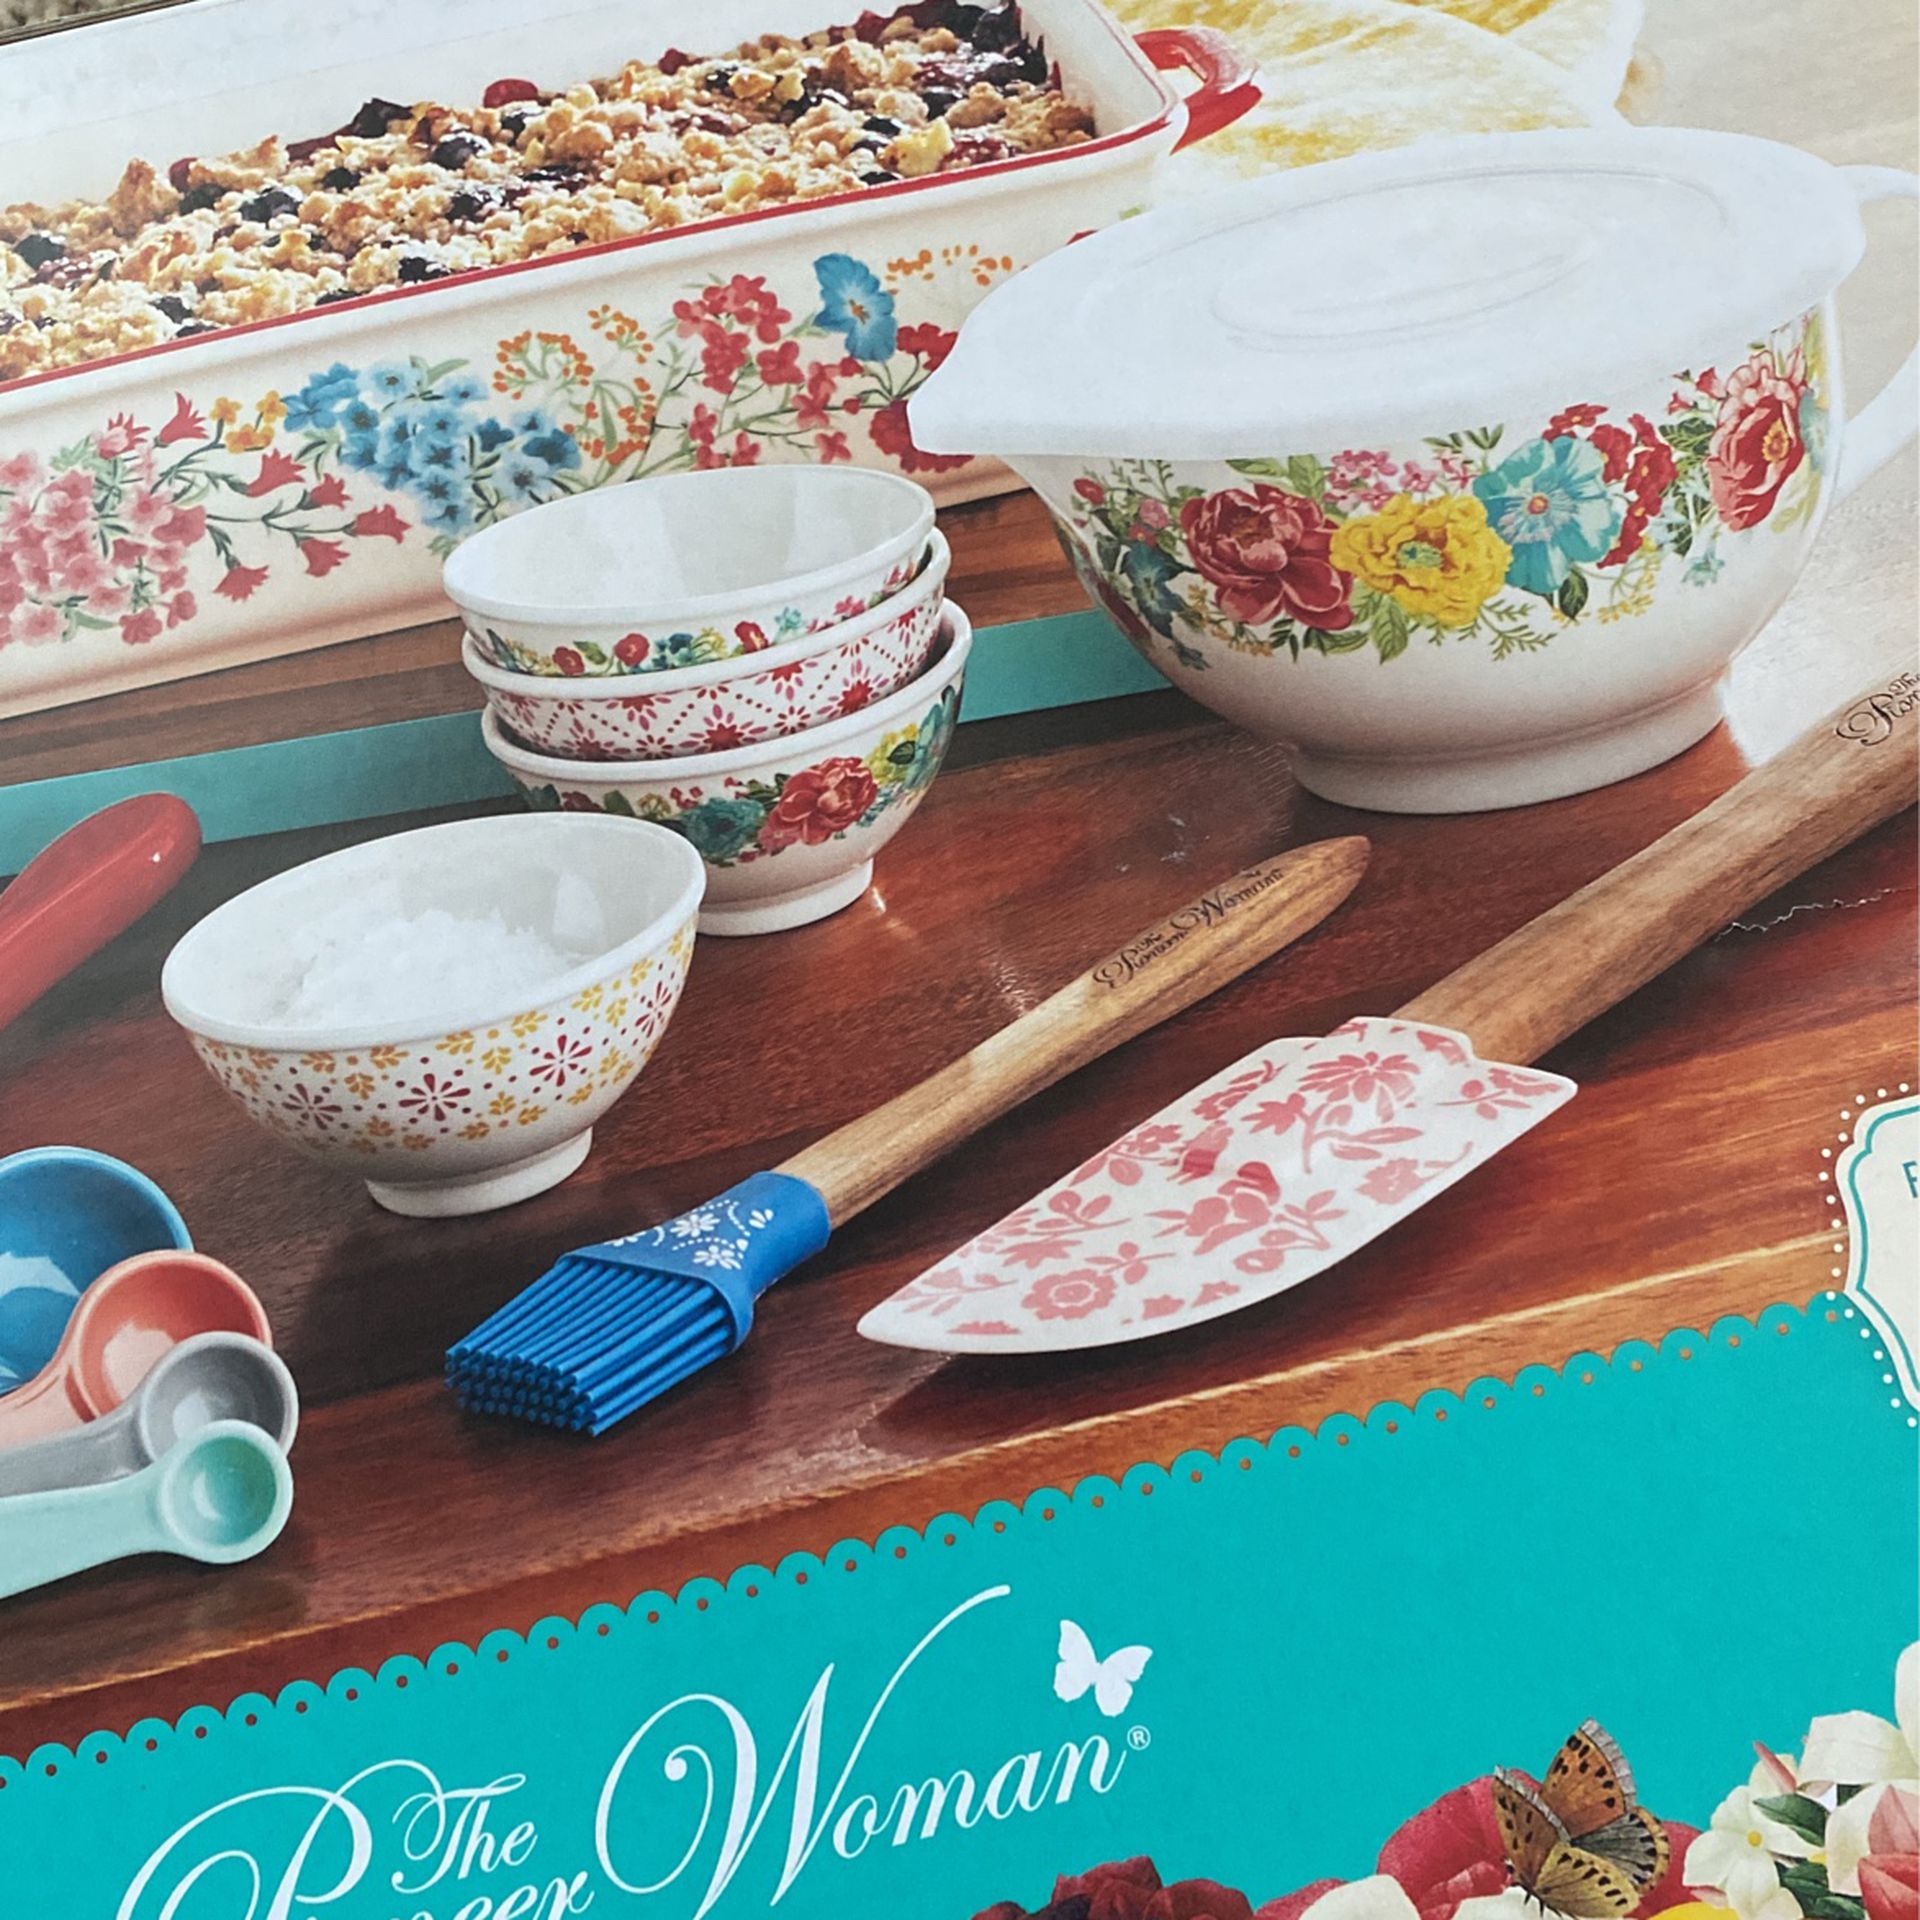 Pioneer Woman 20 Pc Baking Set for Sale in Lacey, WA - OfferUp